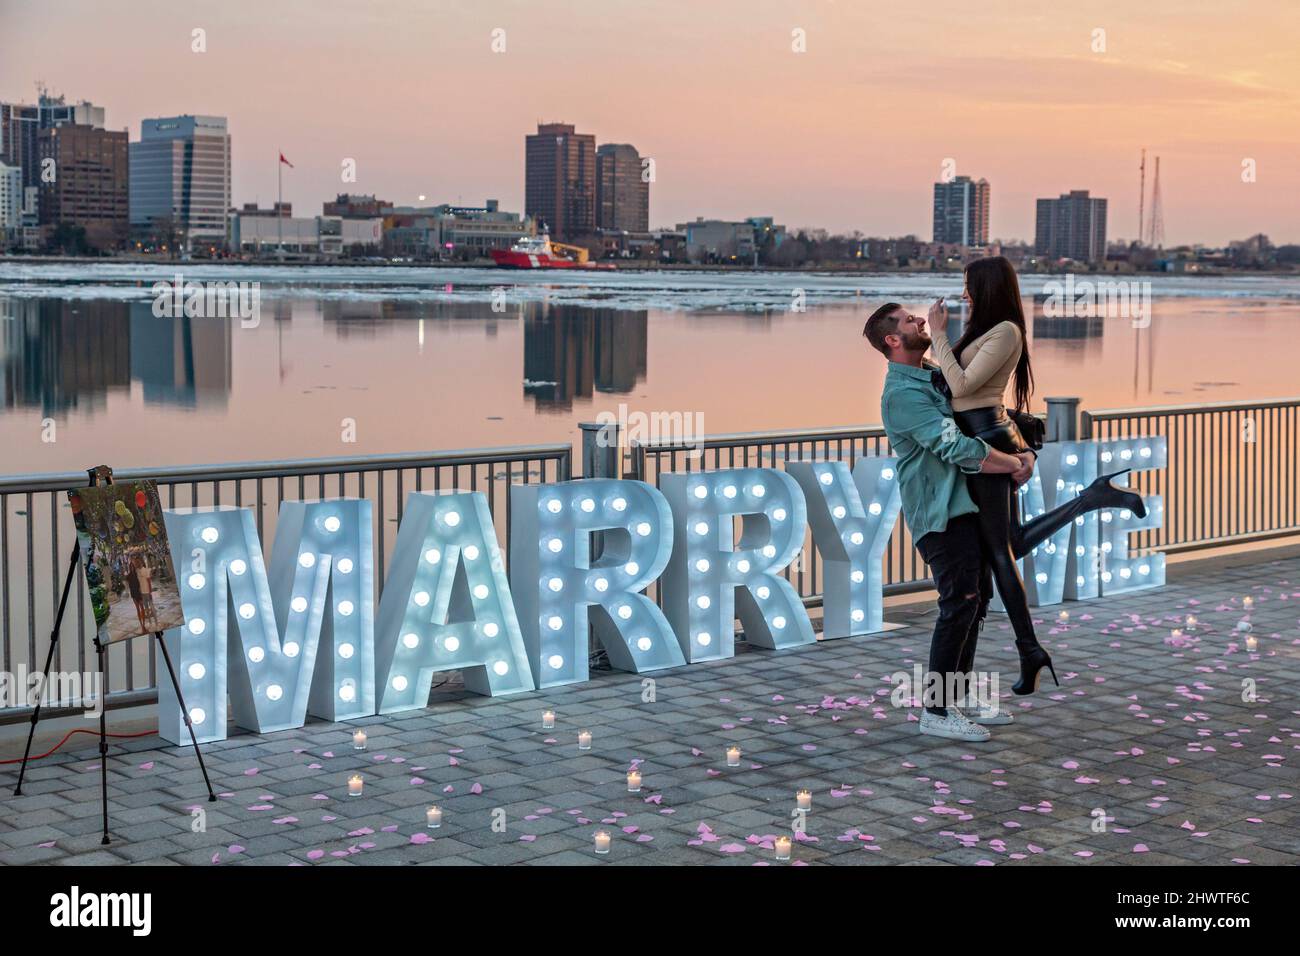 Detroit, Michigan - A happy couple celebrates along the Detroit Riverwalk after the man's public marriage proposal was accepted. Stock Photo